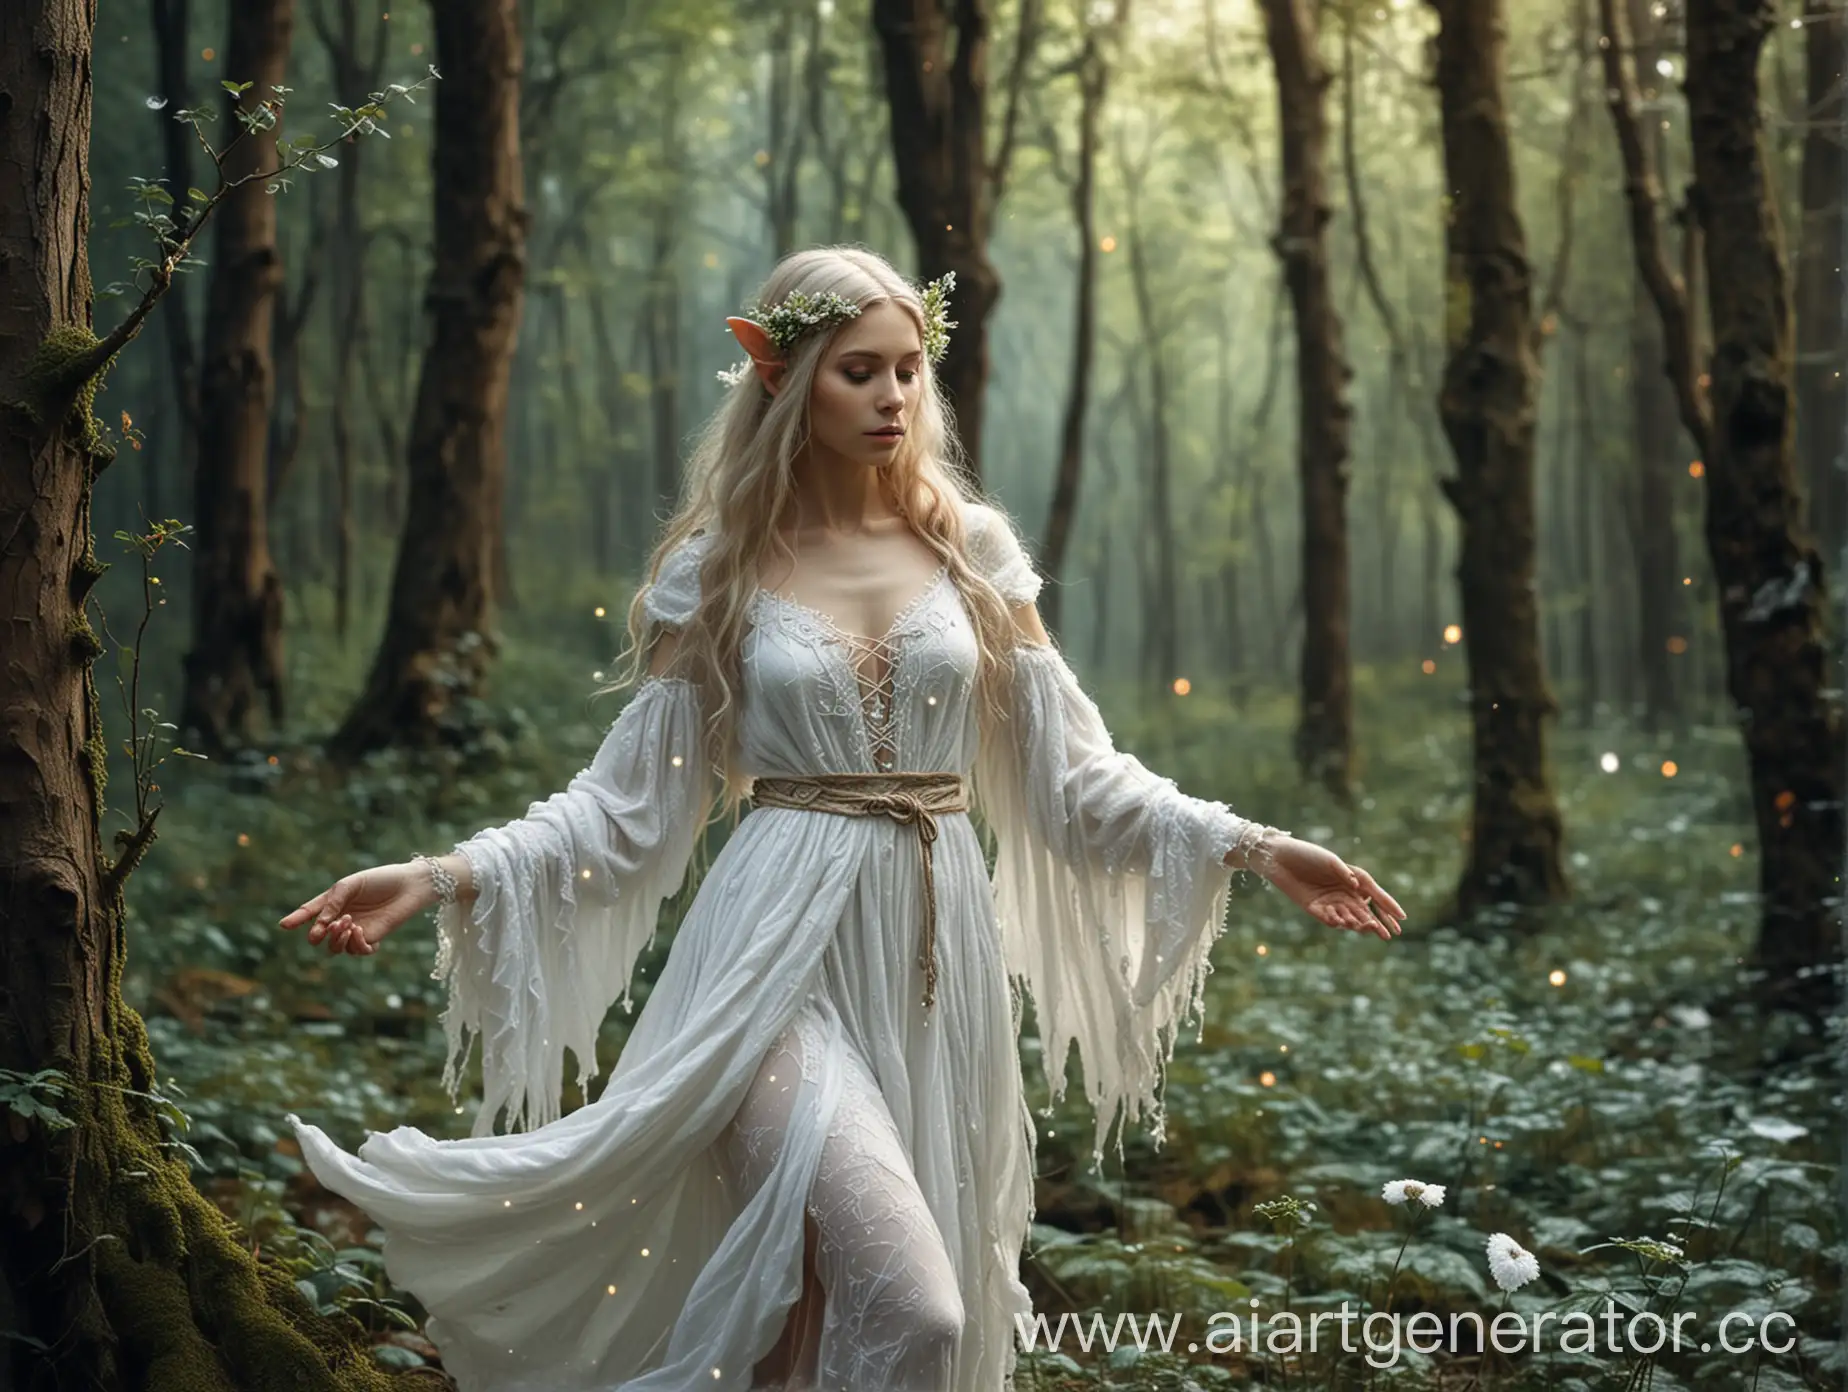 Forest elf in in a white fluffy dress. Art
located in the elven forest. casts a white spell with his hands. there are small magical flashes around her